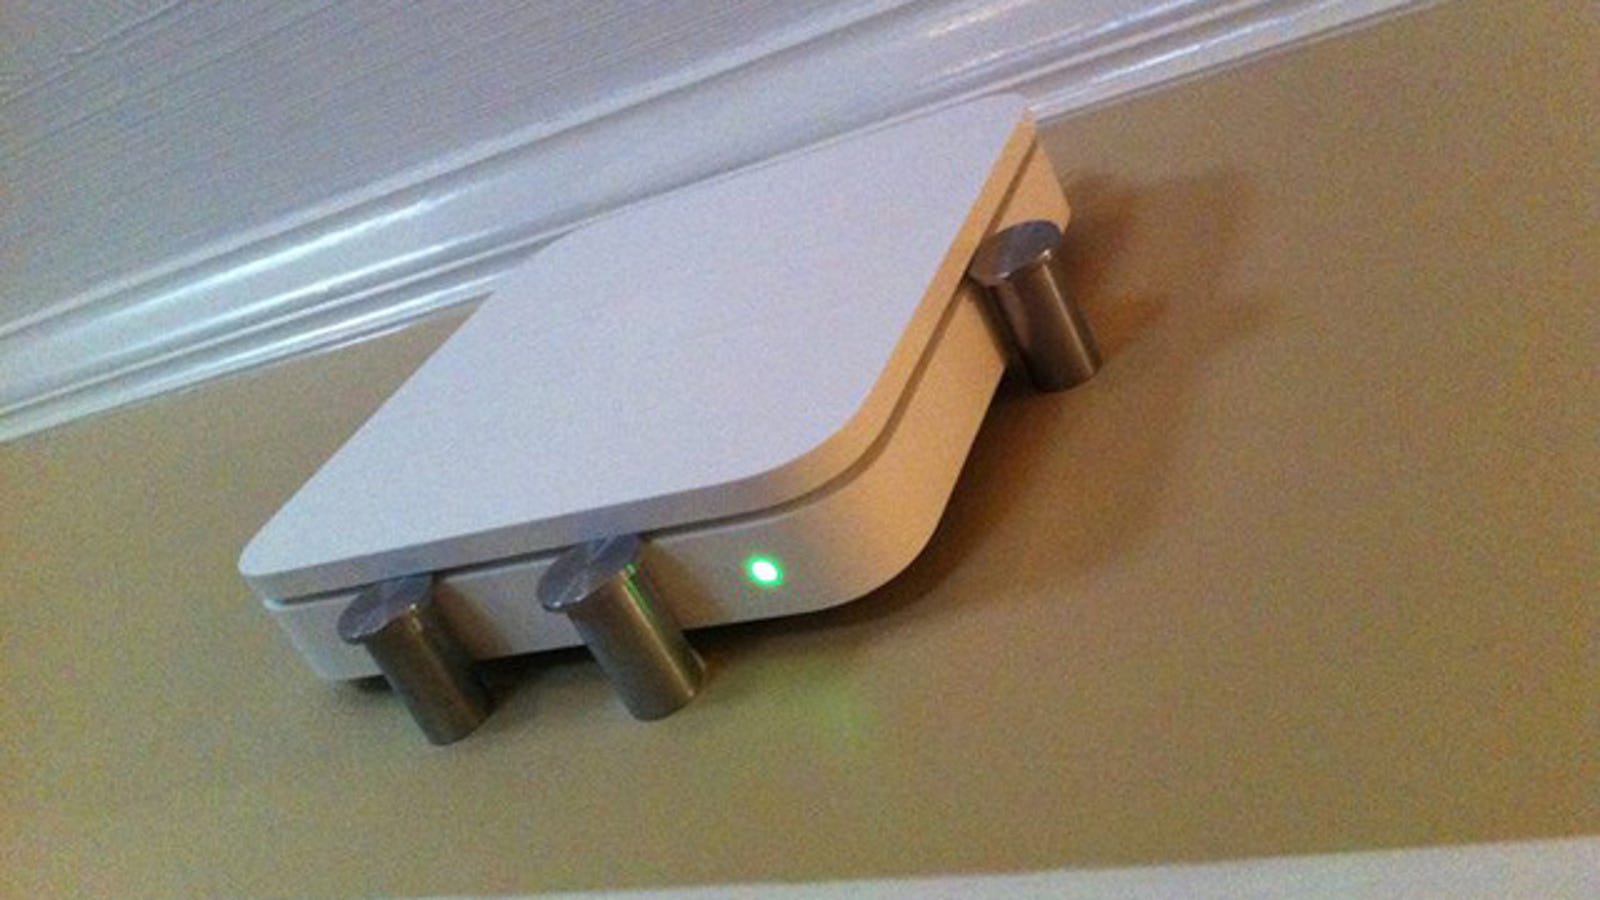 Mount Your Router to the Wall for Better Wi-Fi Reception